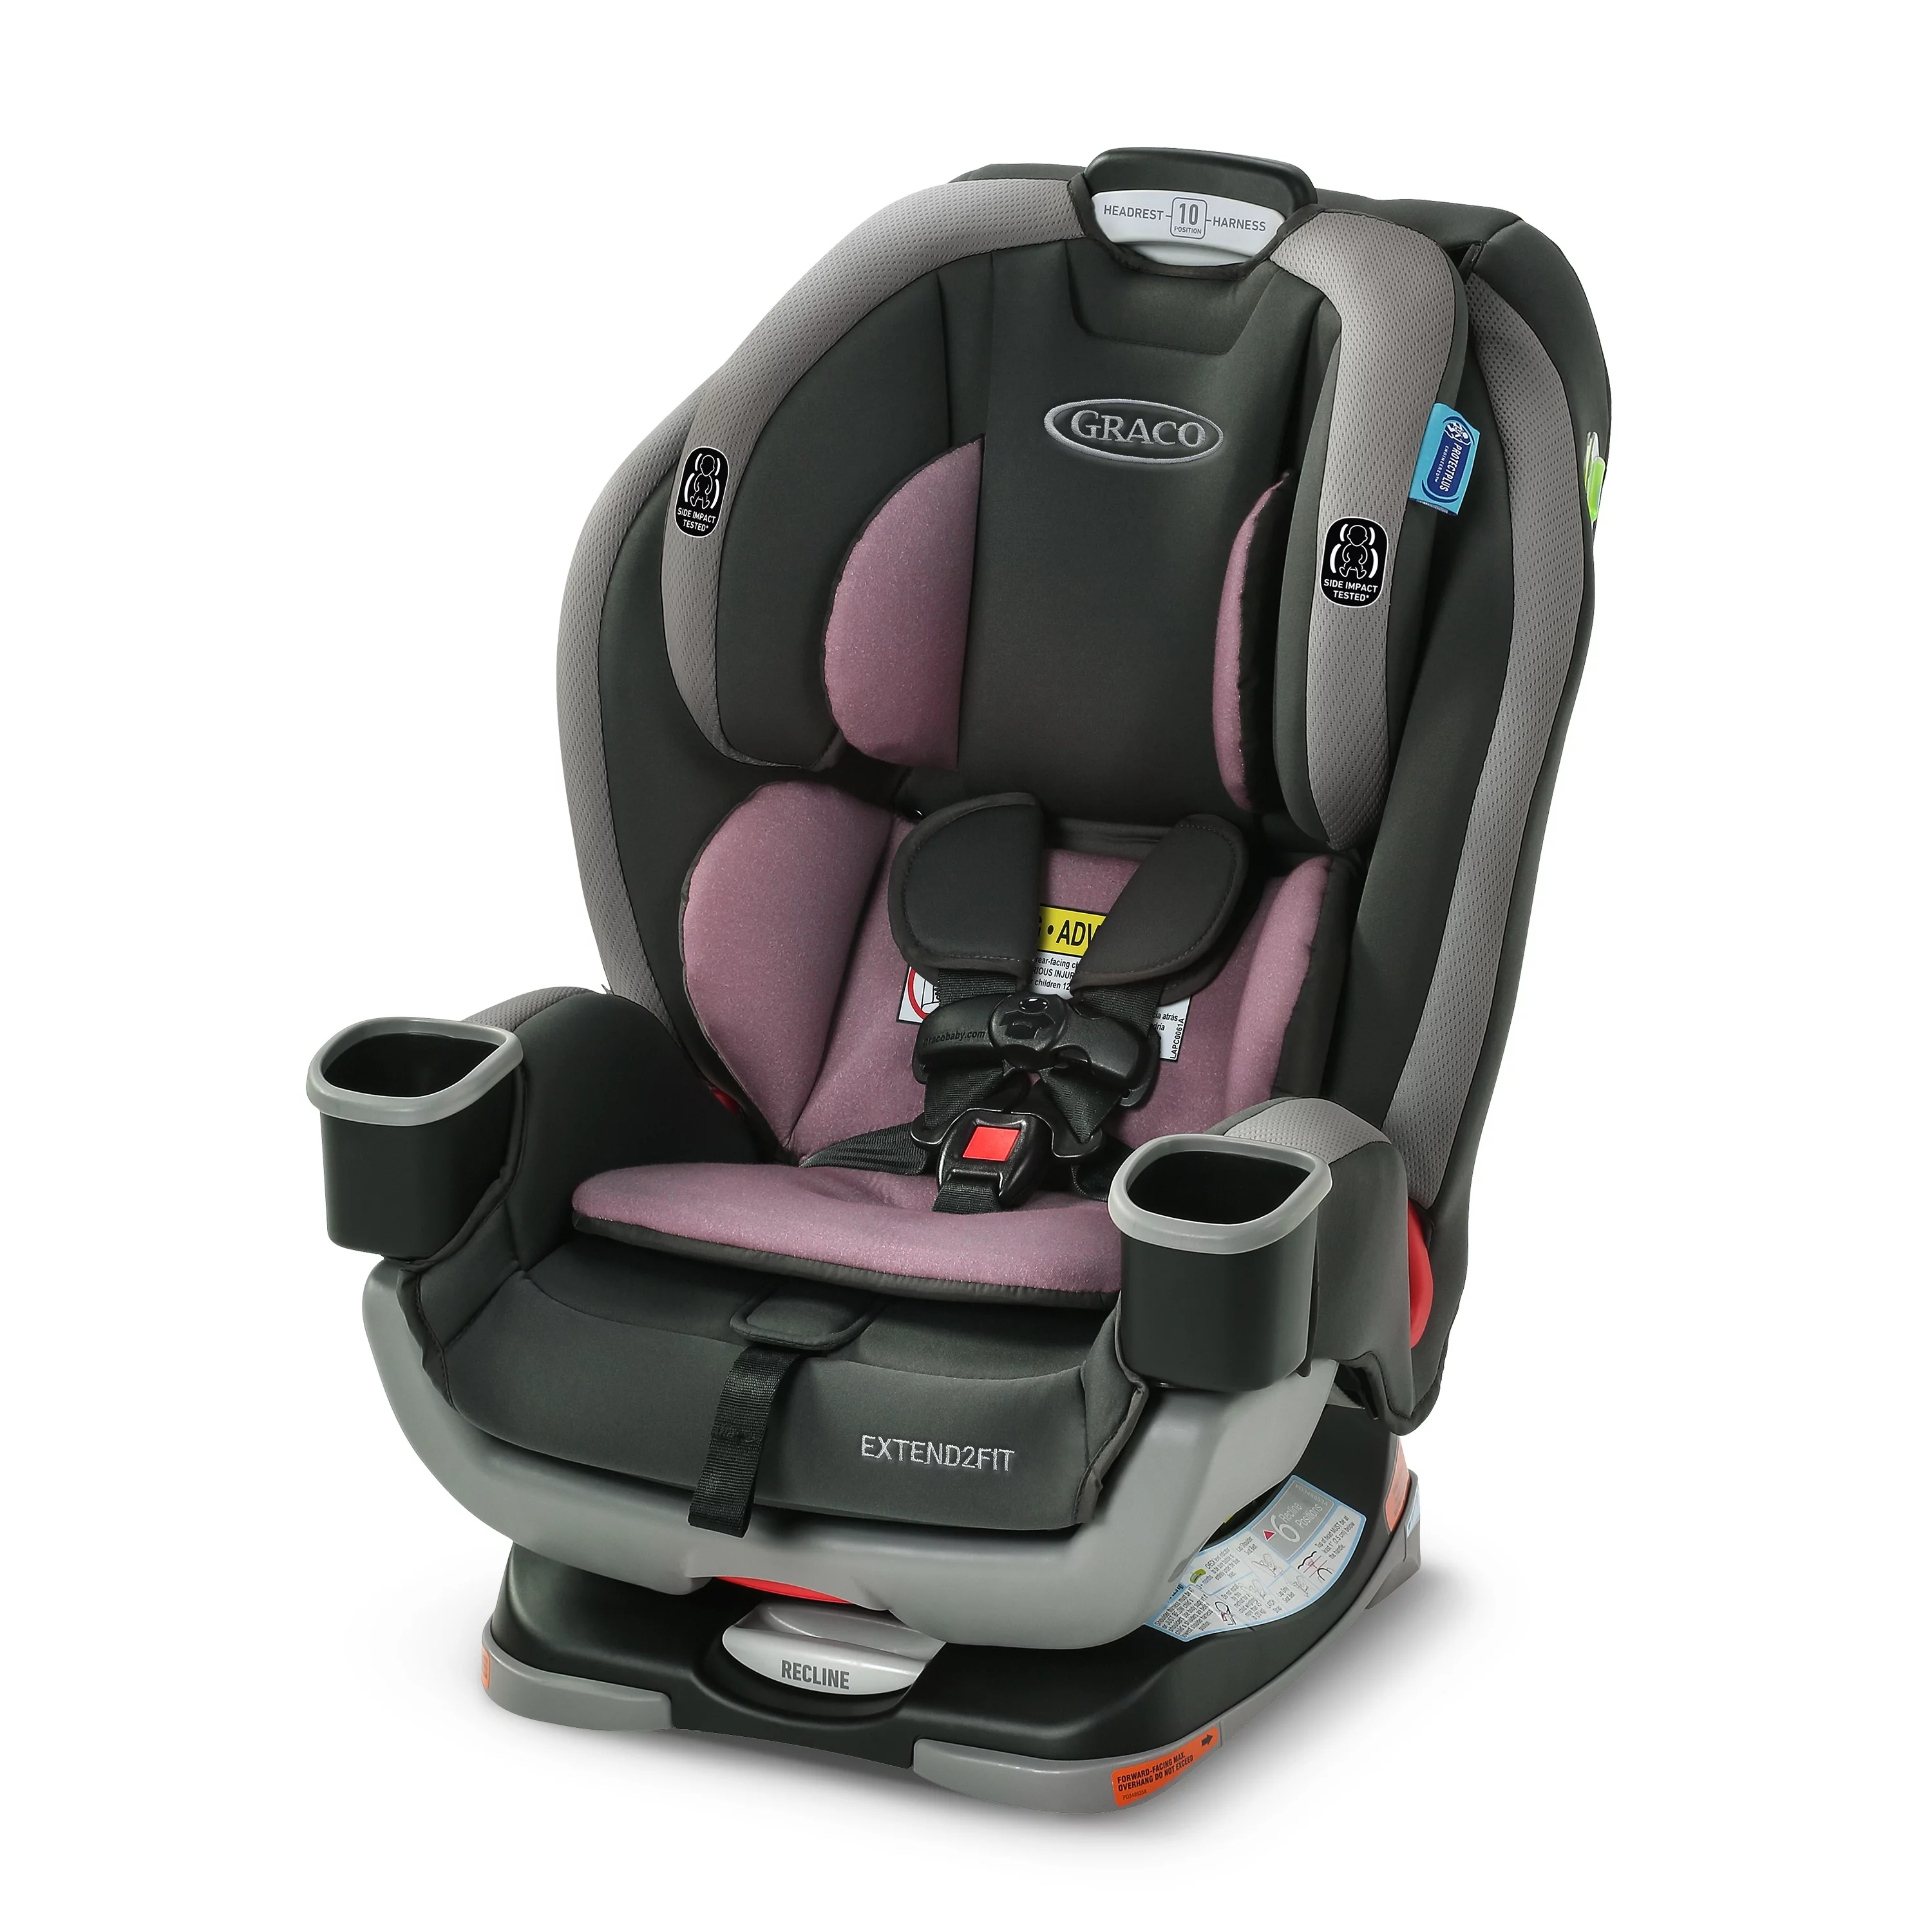 Graco Extend2Fit 3-in-1 Convertible Car Seat, Norah